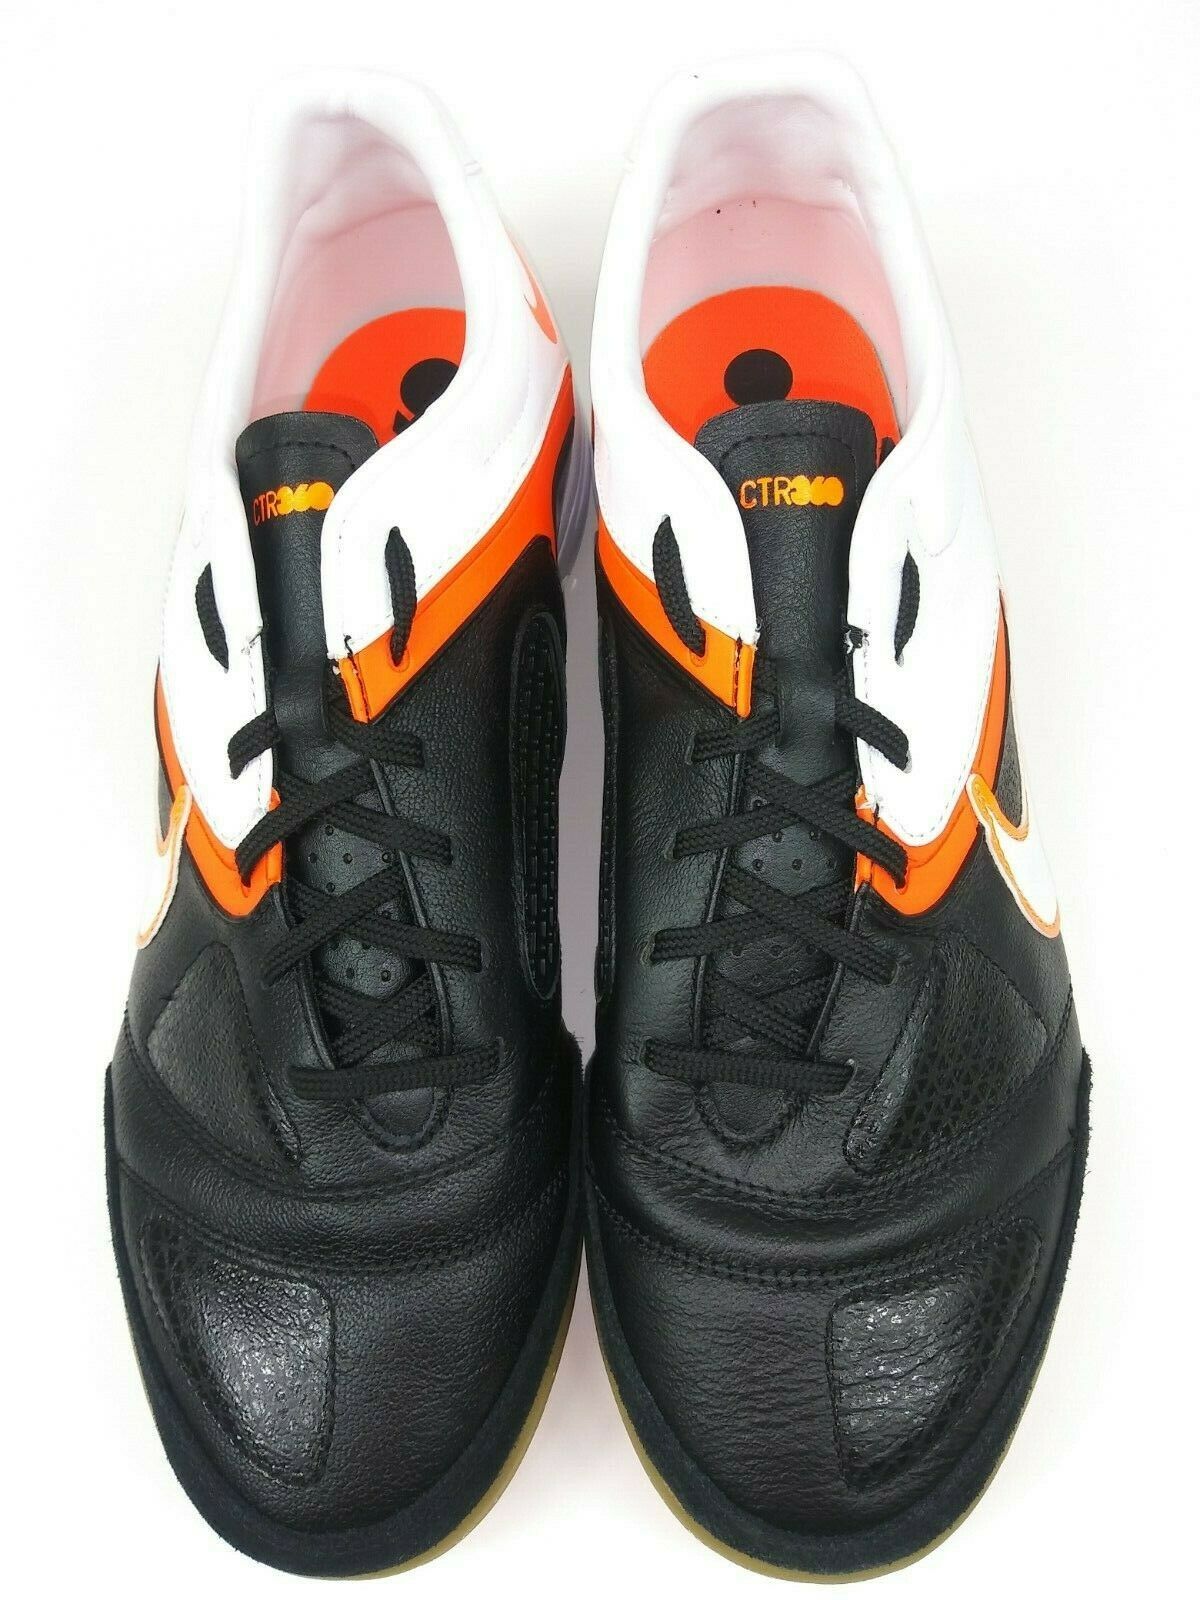 Nike CTR 360 Libretto ll IC Indoor Shoes White Orange